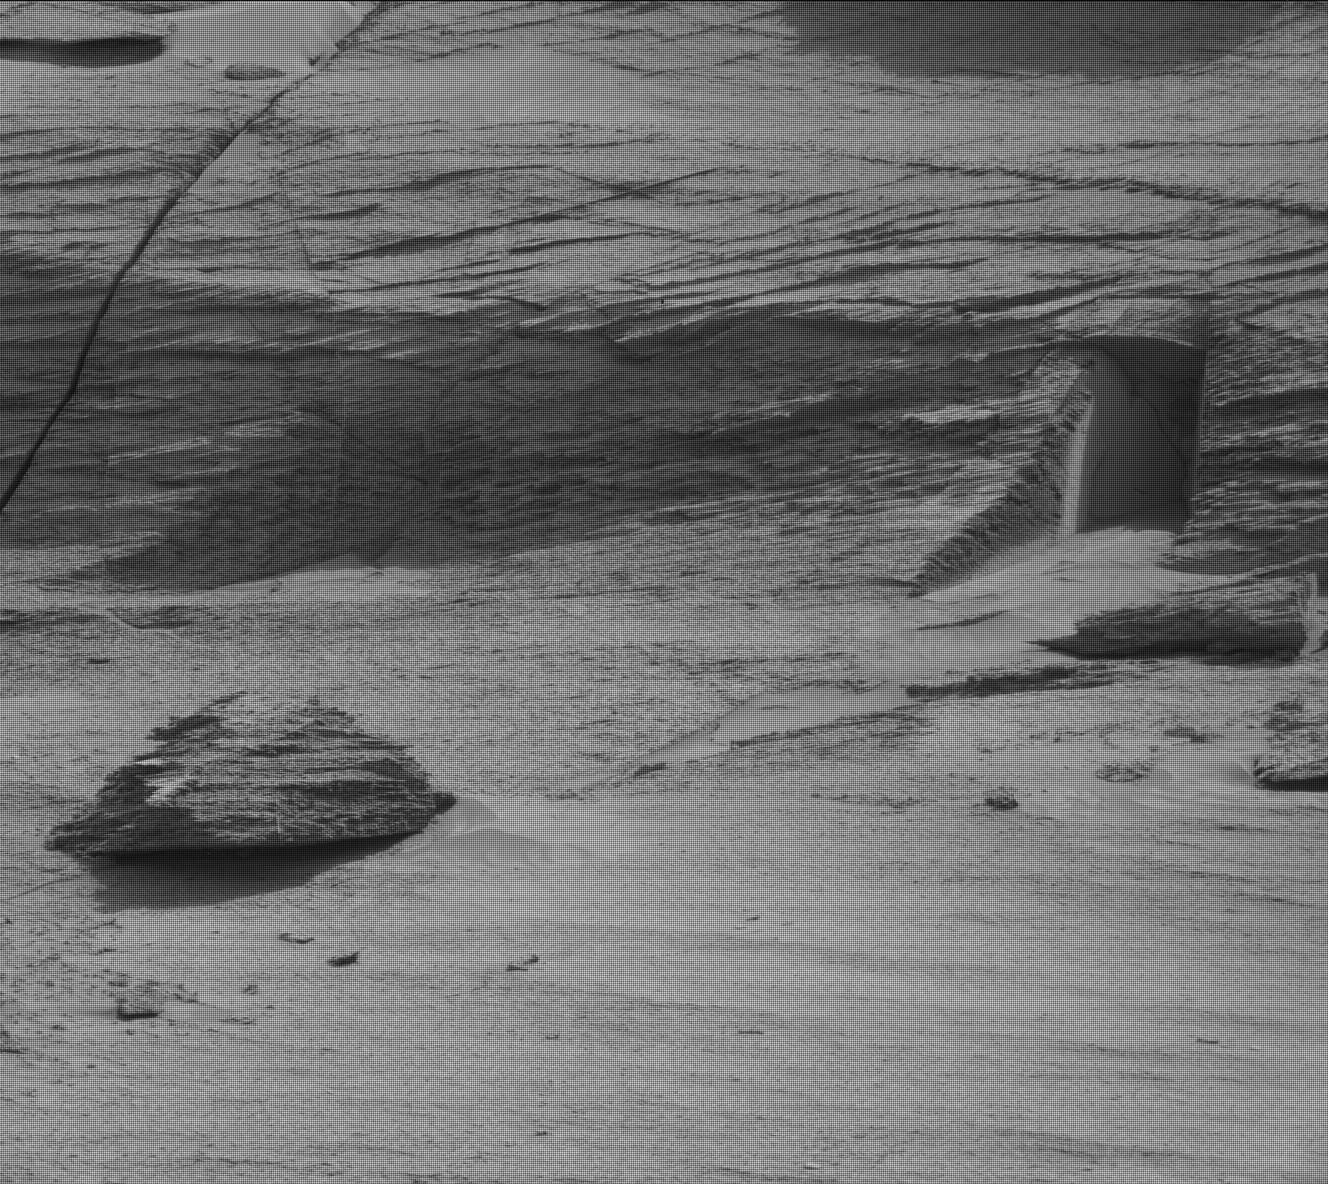 This image made available by NASA was taken by the Mast Camera onboard NASA's Mars rover Curiosity on Sol 3466, NASA’s Mars rover has captured images of a doorway cut into a mountainside of the red planet, suggesting the presence of extraterrestrial life, May 20, 2022. (AP Photo)